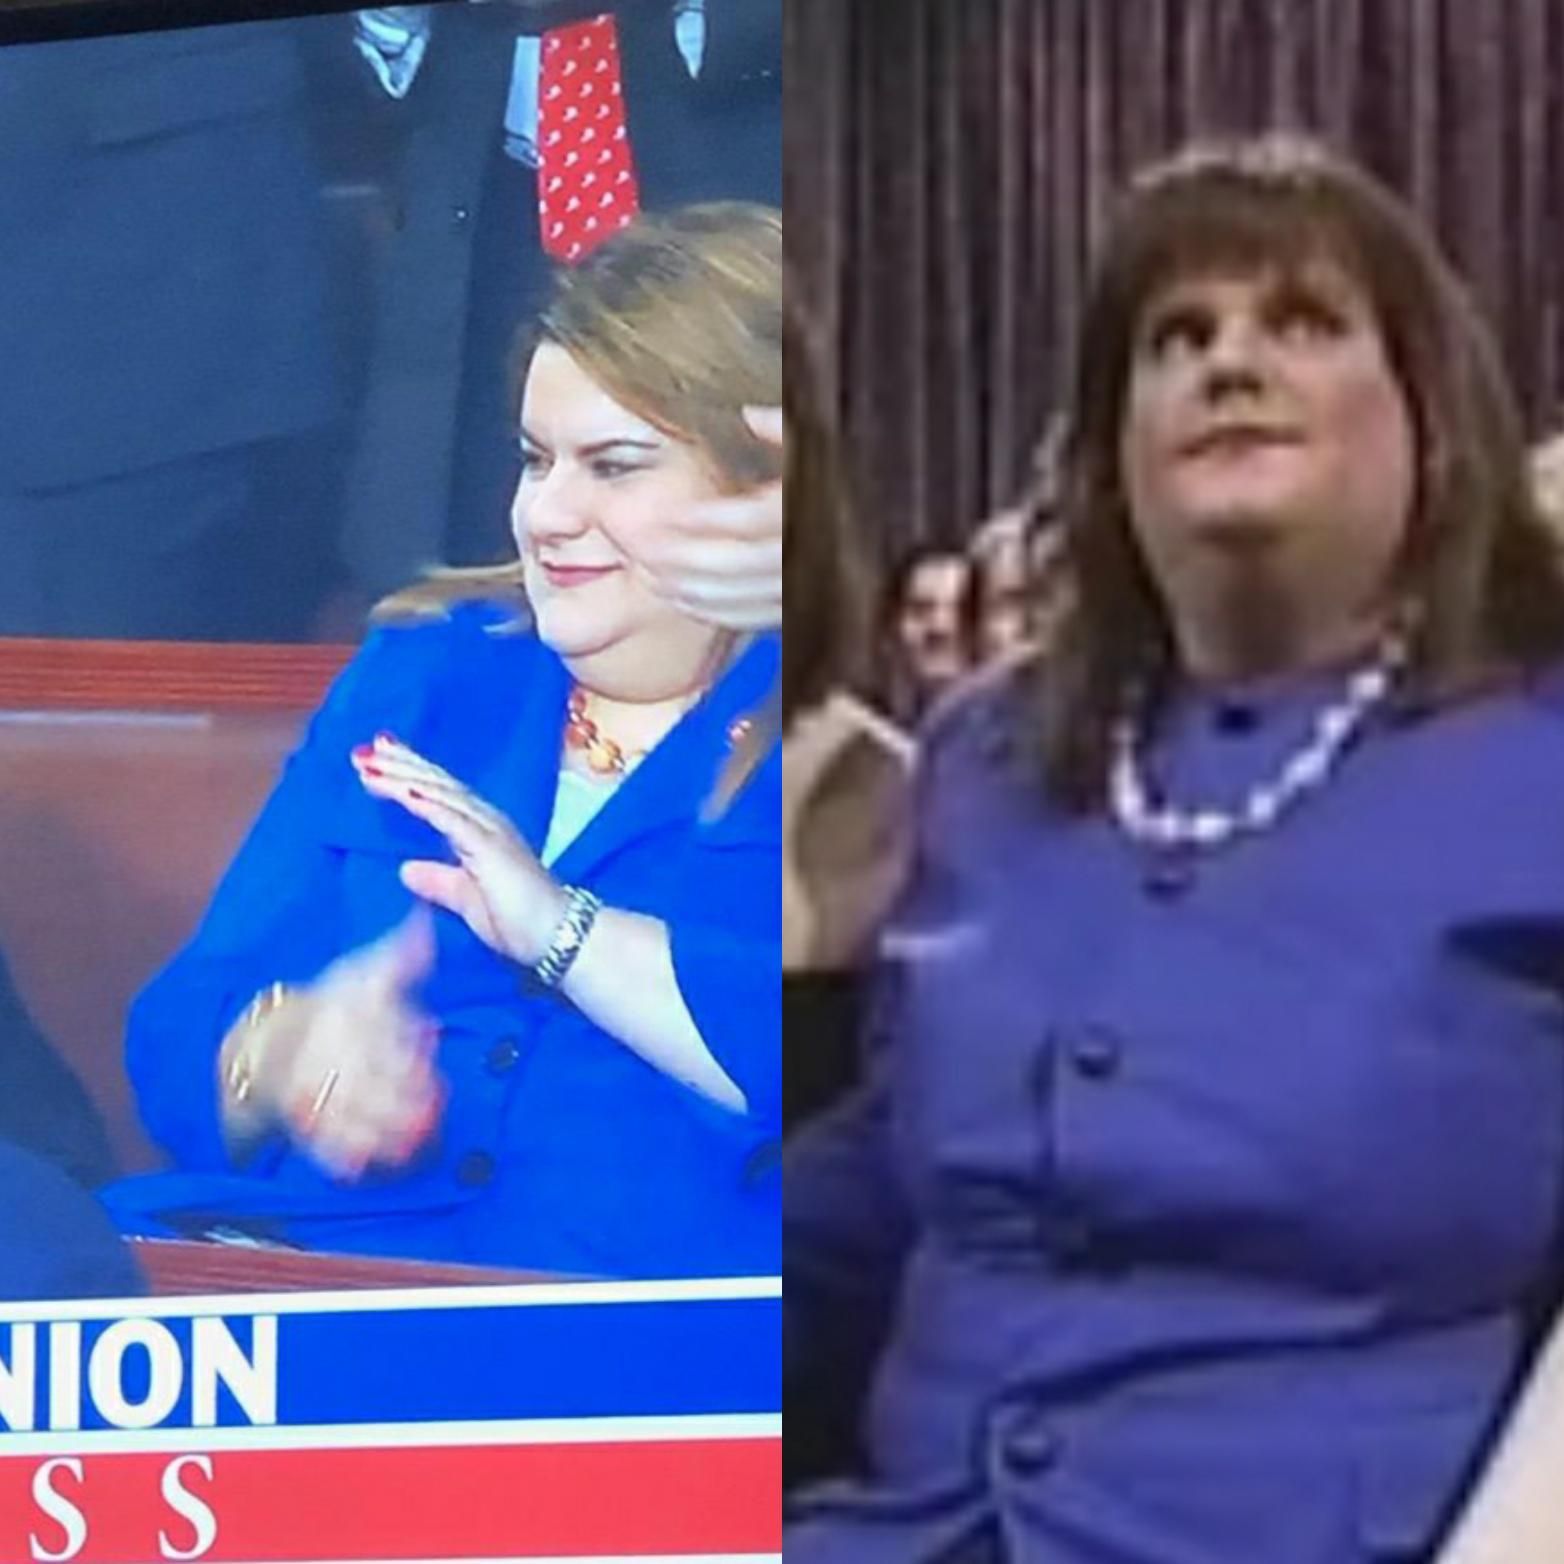 I was watching the State of the Union address, while I spotted the ghost of Chris Farley in the audience.